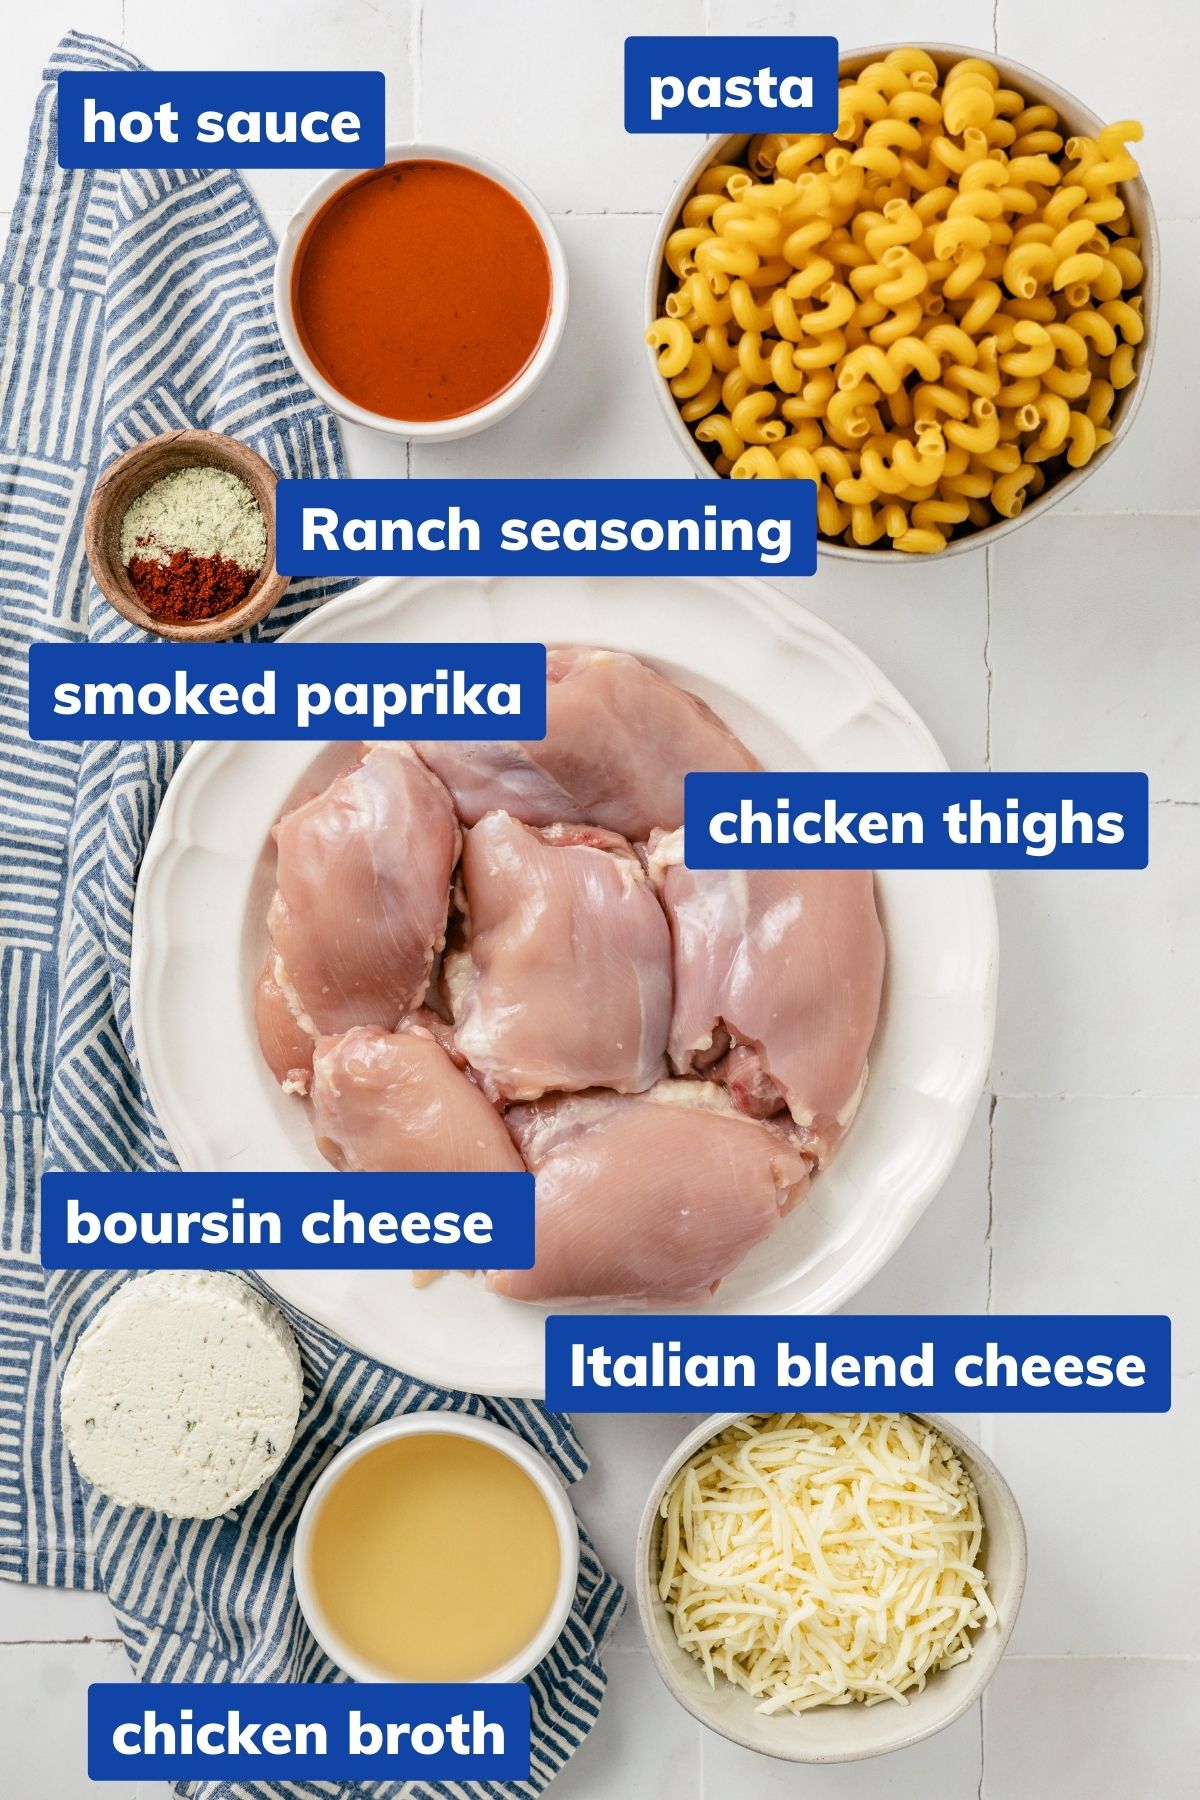 ingredients to make buffalo chicken pasta: Chicken thighs, Ranch seasoning, Smoked Paprika, Hot sauce, Chicken broth, Boursin cheese, Italian blend cheese, Pasta on separate bowls